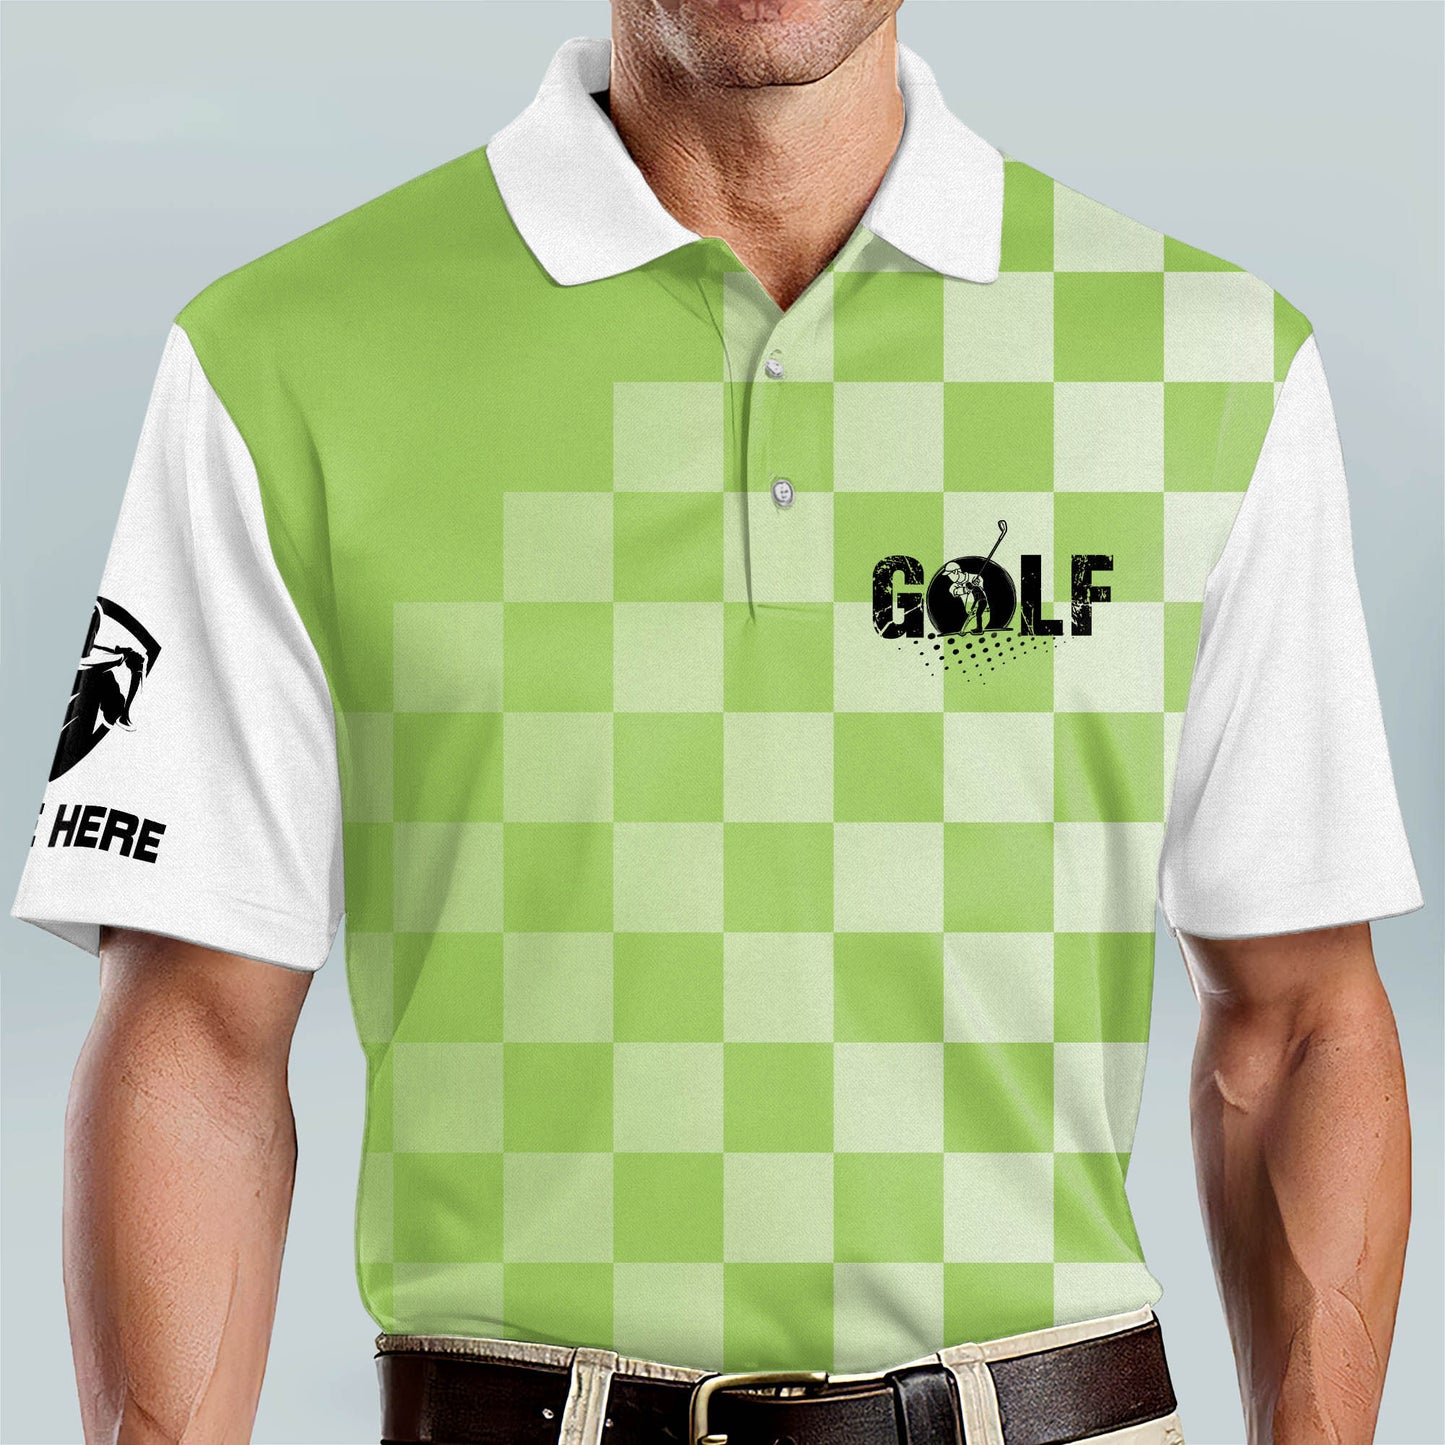 May The Course Be with You Golf Polo Shirt GM0313